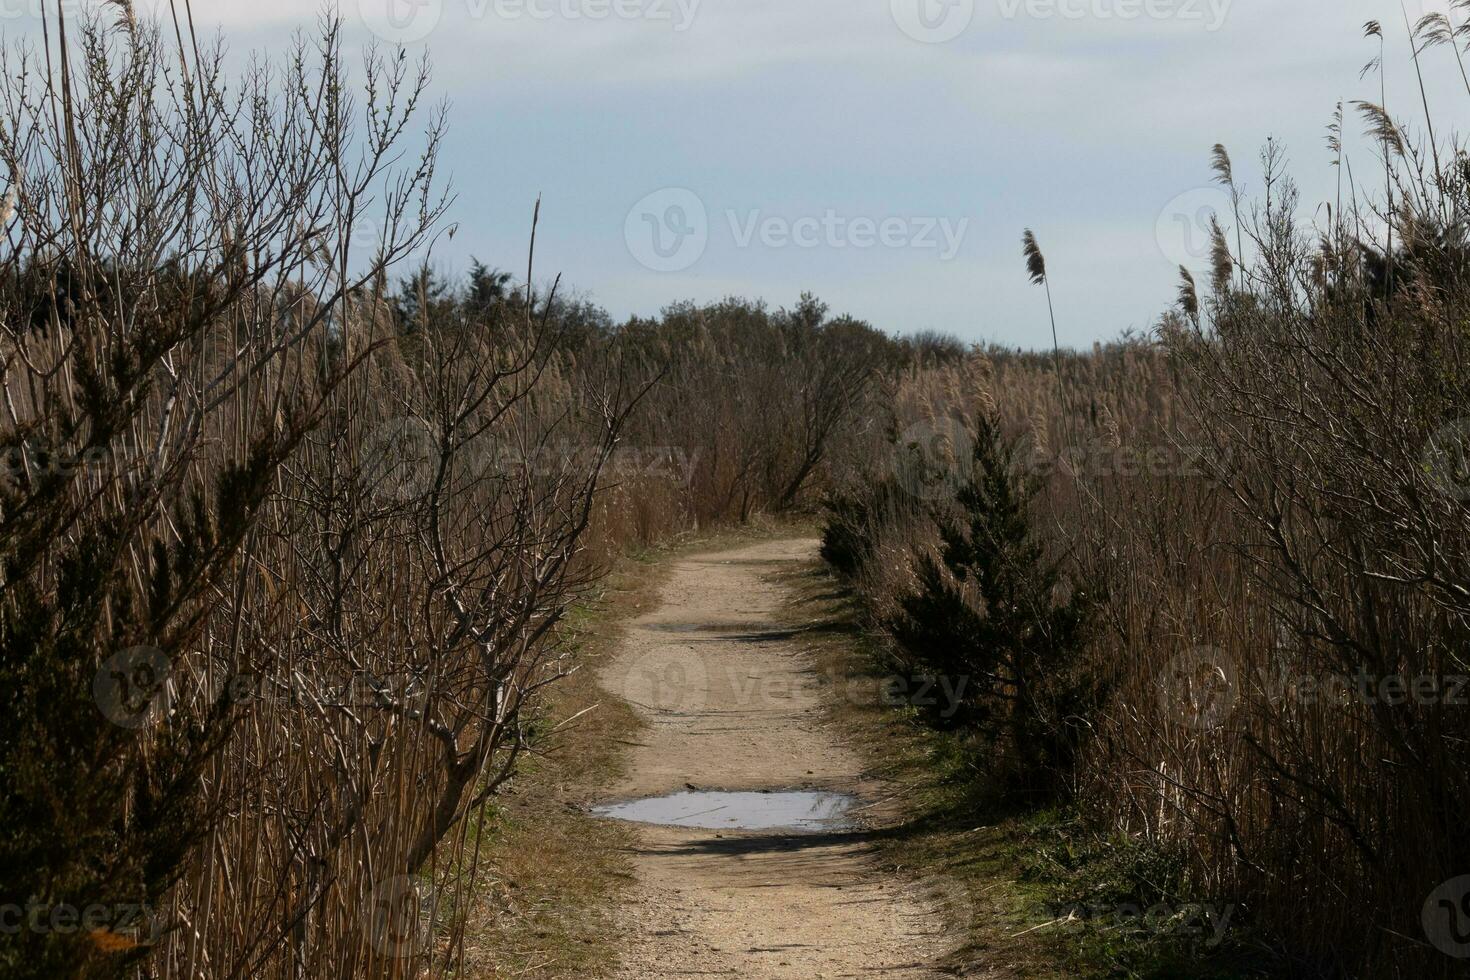 I love the look of this beautiful dirt path running through the brown foliage. This image almost has a Fall or beach look to it. The tall overgrown grass looks pretty in this nature preserve. photo